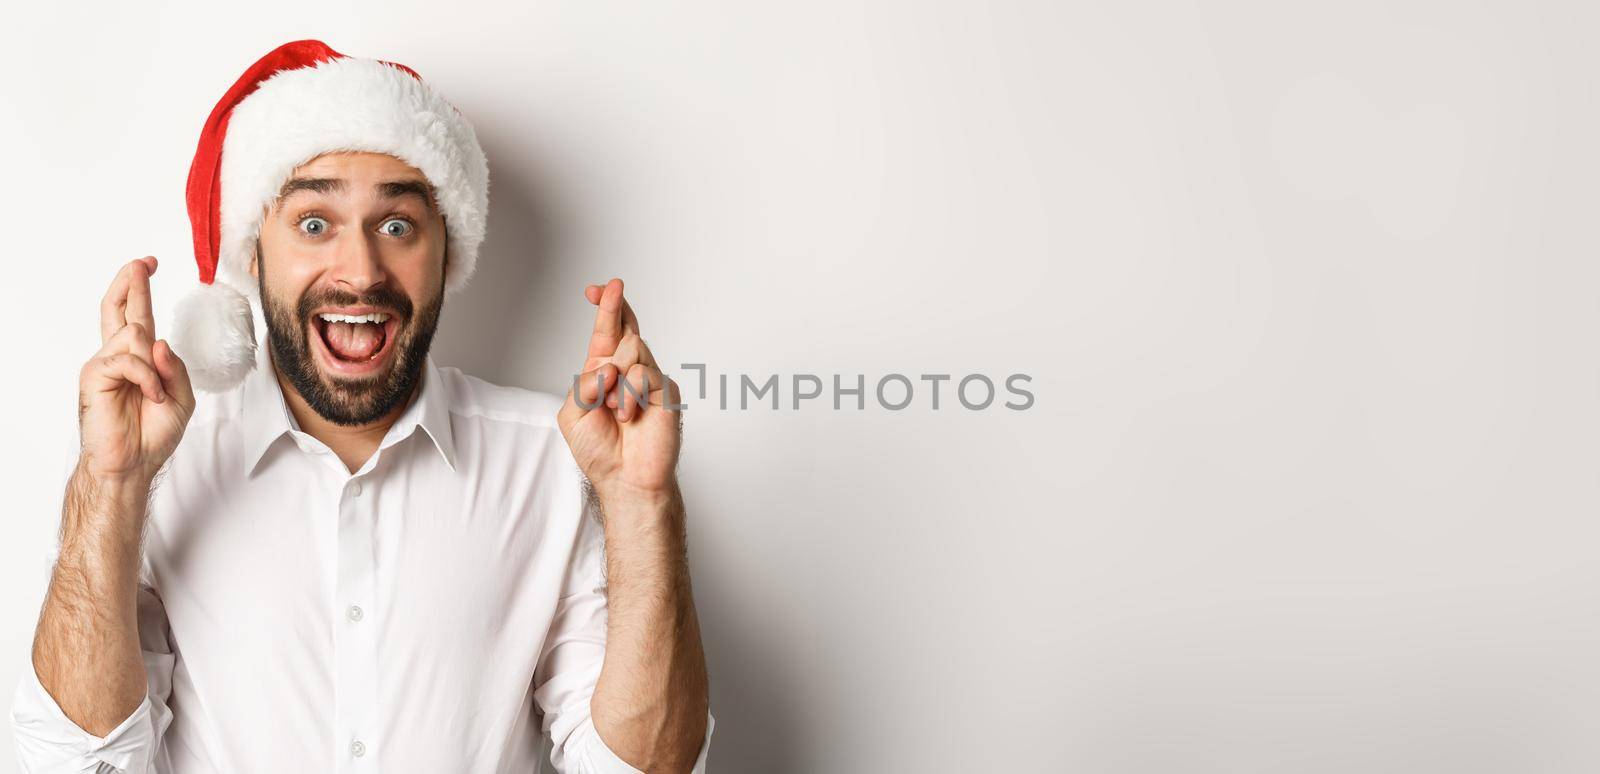 Party, winter holidays and celebration concept. Happy man in santa hat making christmas wish, cross fingers for good luck and looking excited, white background.